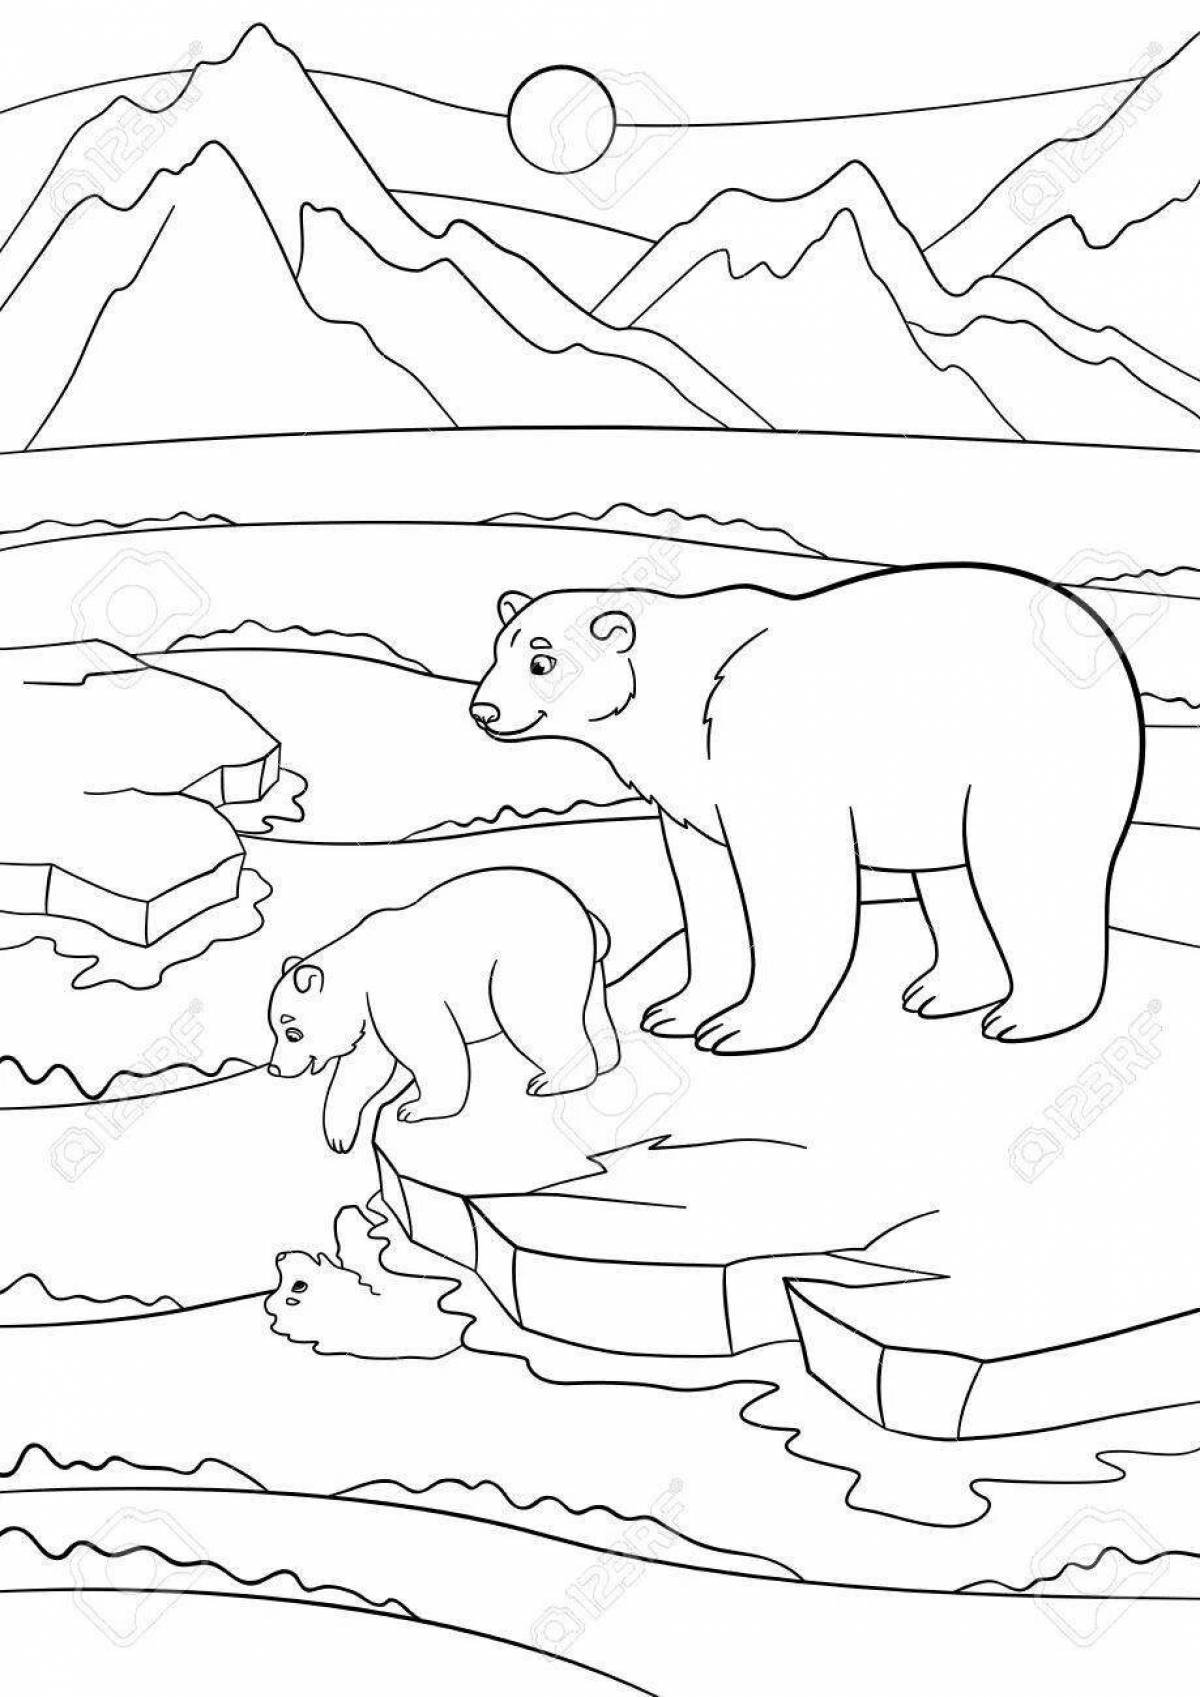 Coloring book glowing polar bear with cub